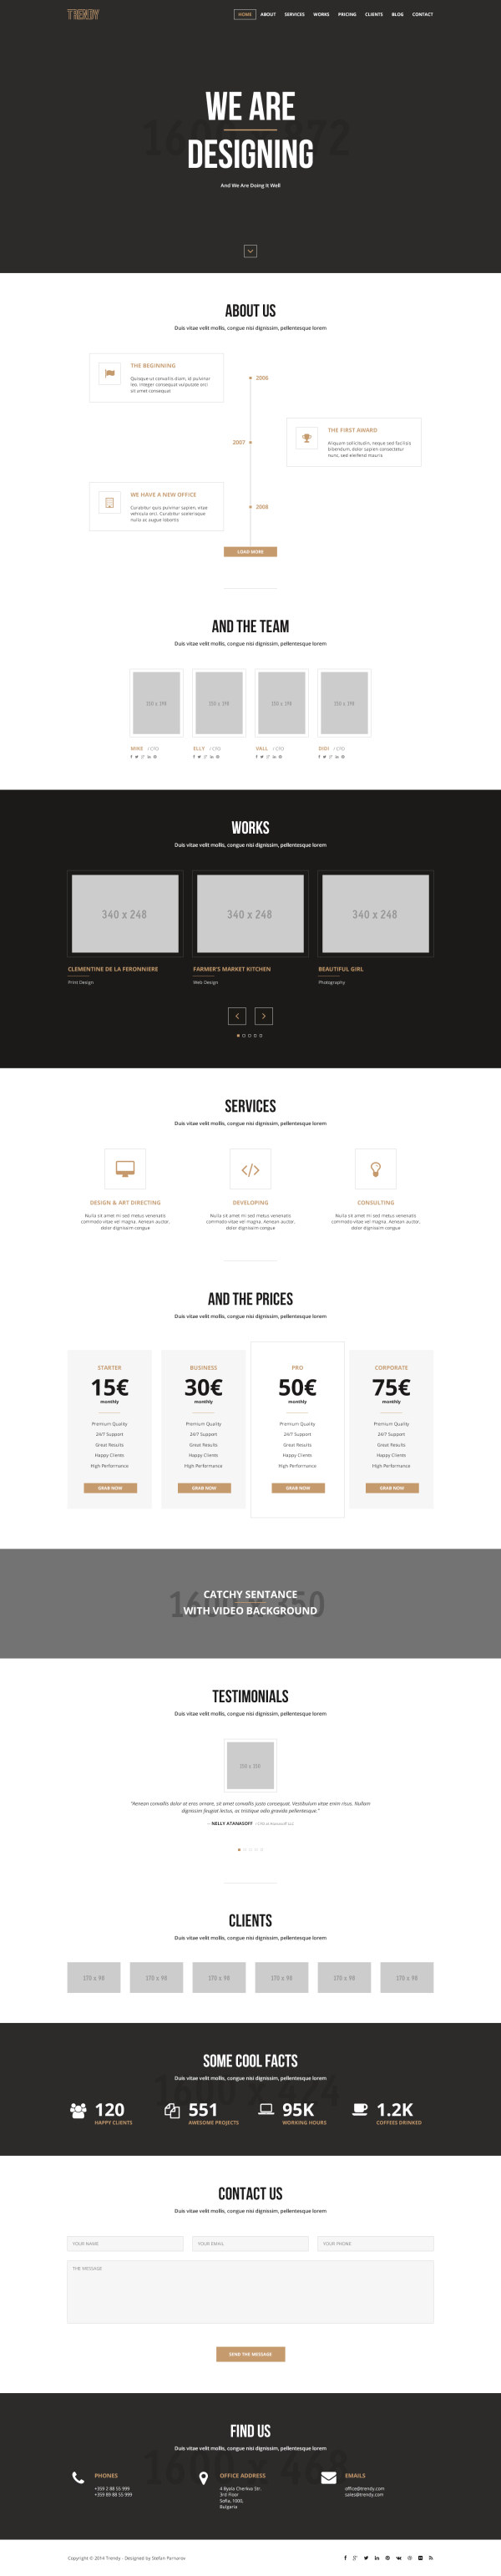 black-and-white-website-templates-free-download-printable-templates